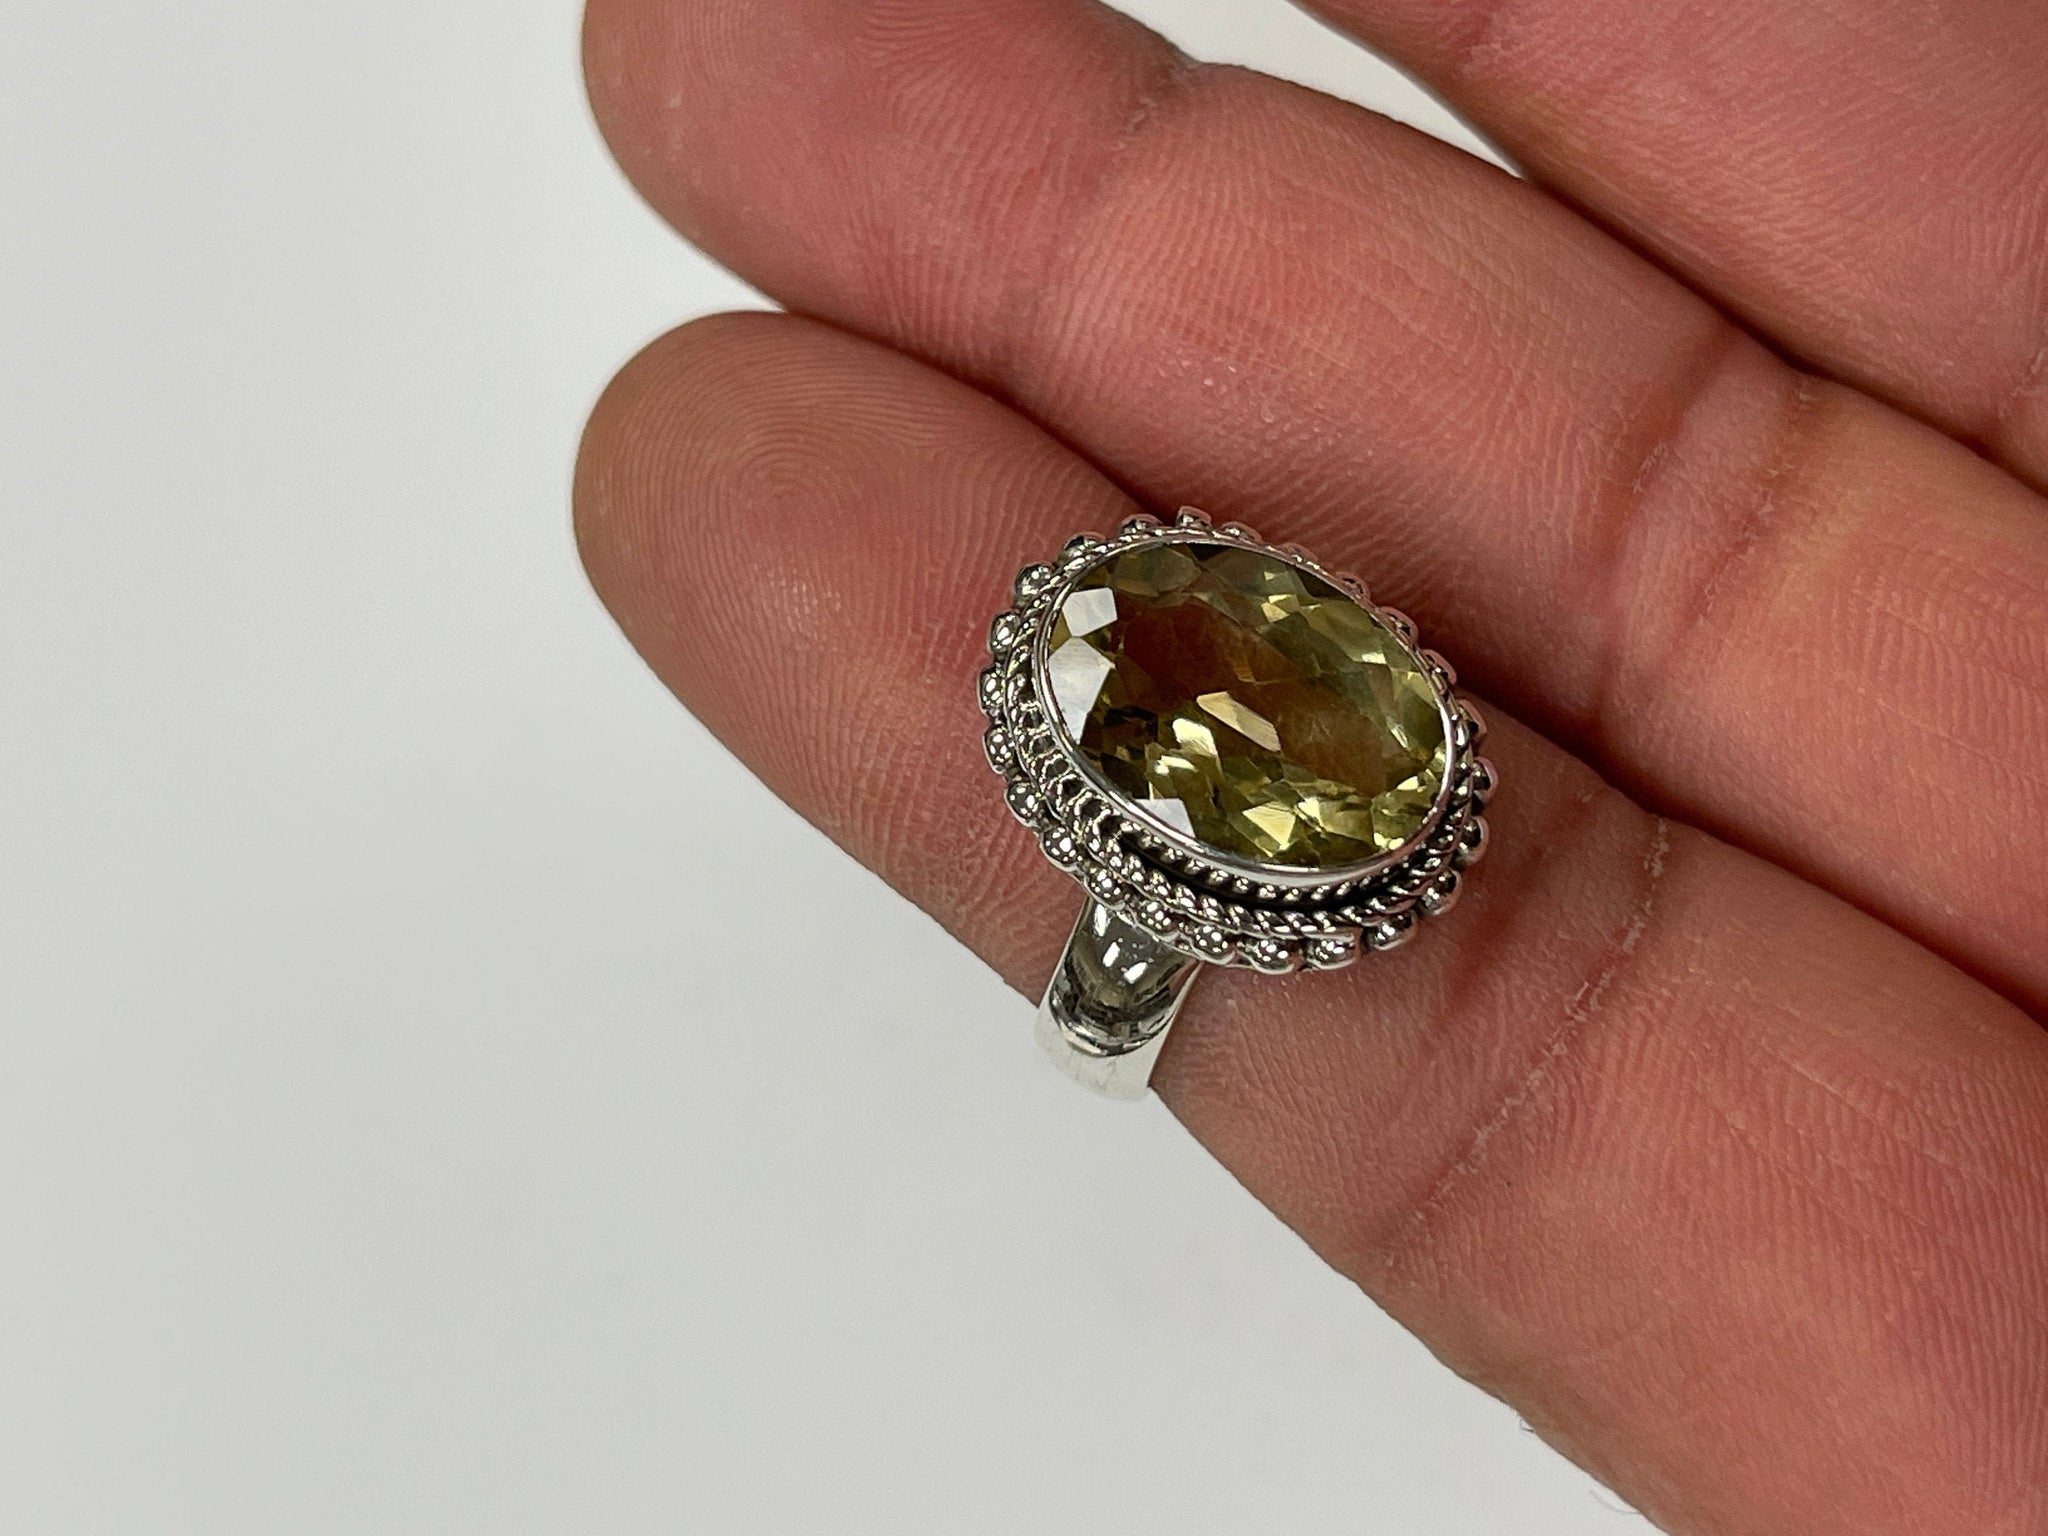 Solid 925 Sterling Silver and Natural AAA+ Citrine Faceted Gemstone Ring, Size 7 Handmade Ring, Boho Hippie Style, Healing Energy Gemstone